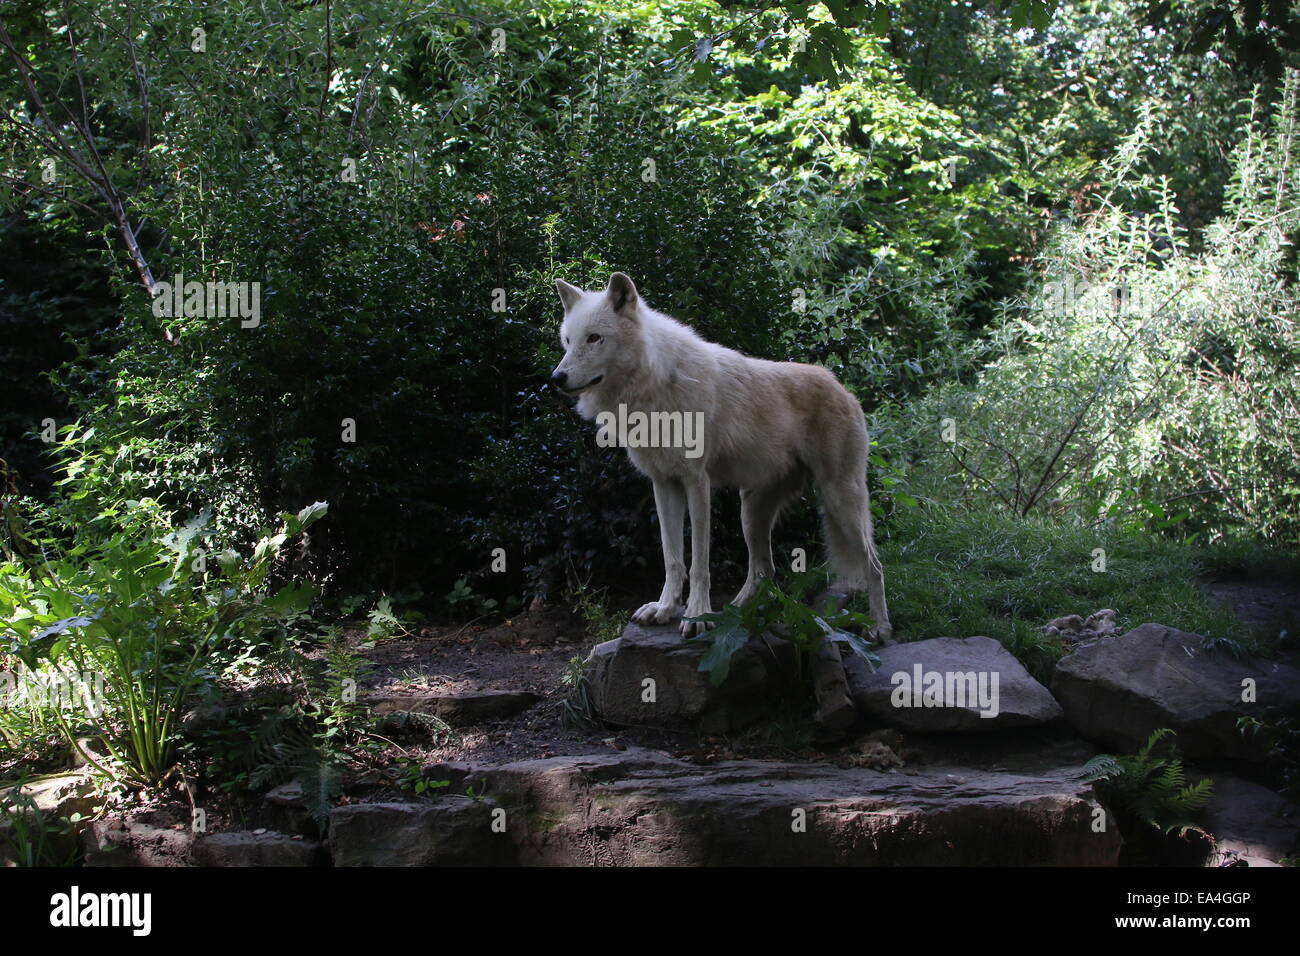 Close-up of the All-white Hudson Bay wolf (Canis lupus hudsonicus) Stock Photo